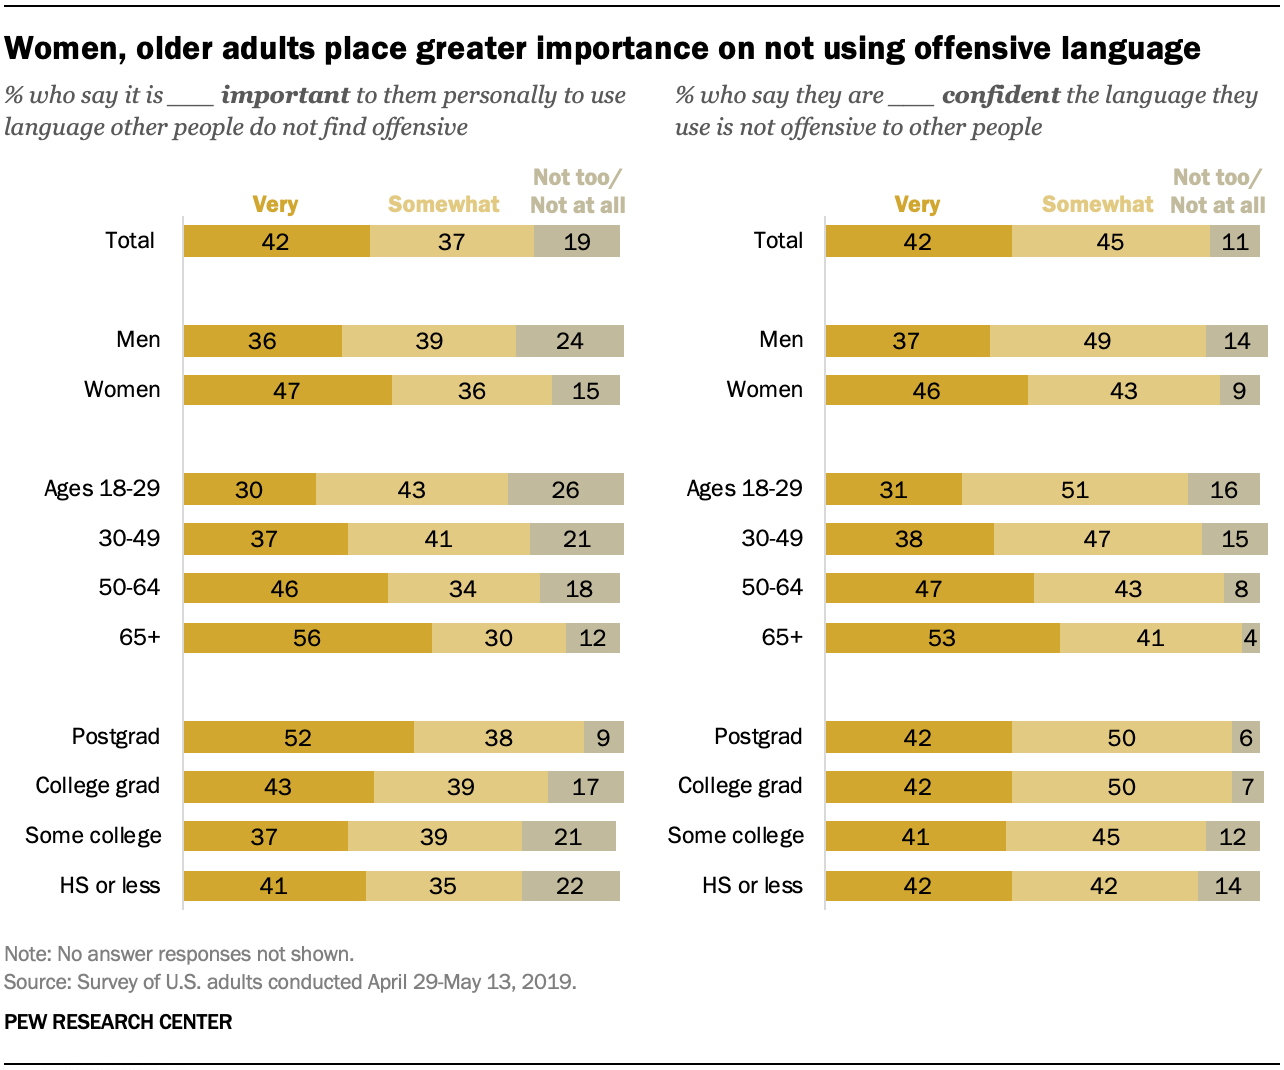 Women, older adults place greater importance on not using offensive language